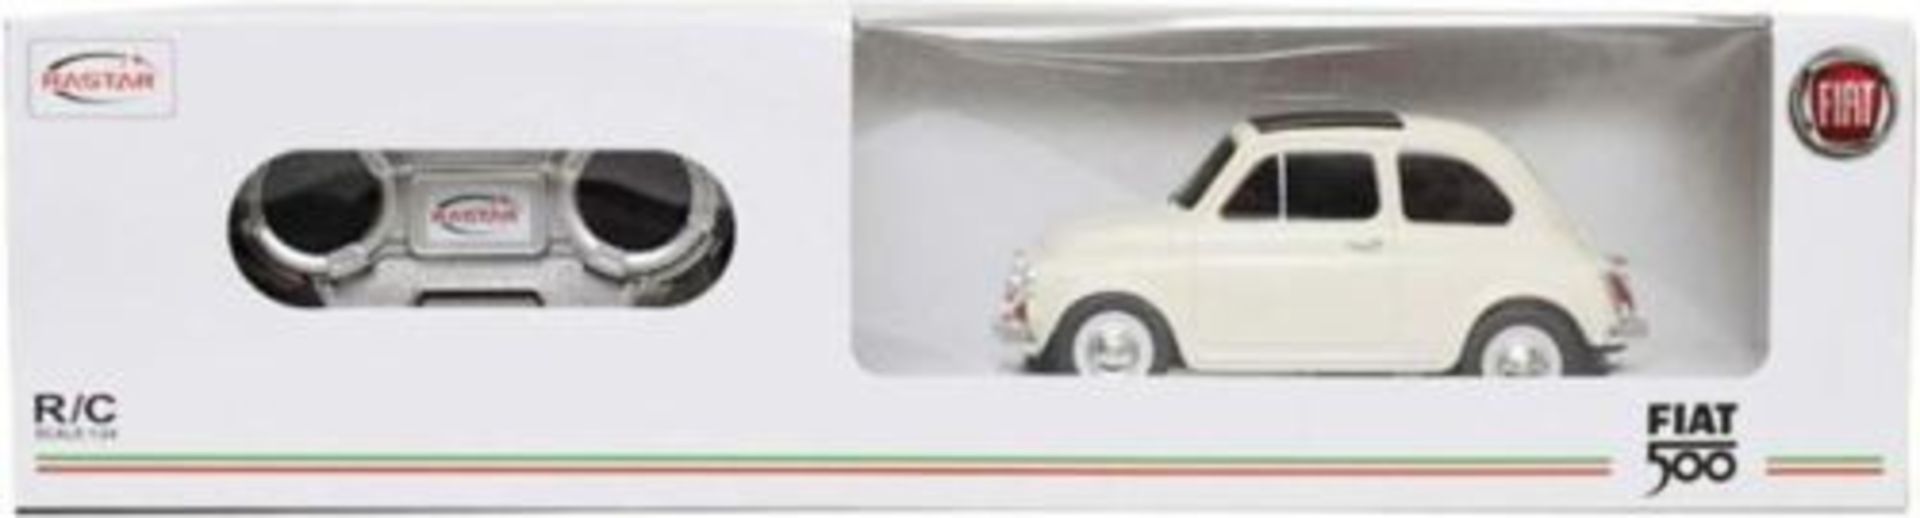 V *TRADE QTY* Brand New 1:24 Scale Radio Control Fiat 500 - Fully Licensed X 4 YOUR BID PRICE TO